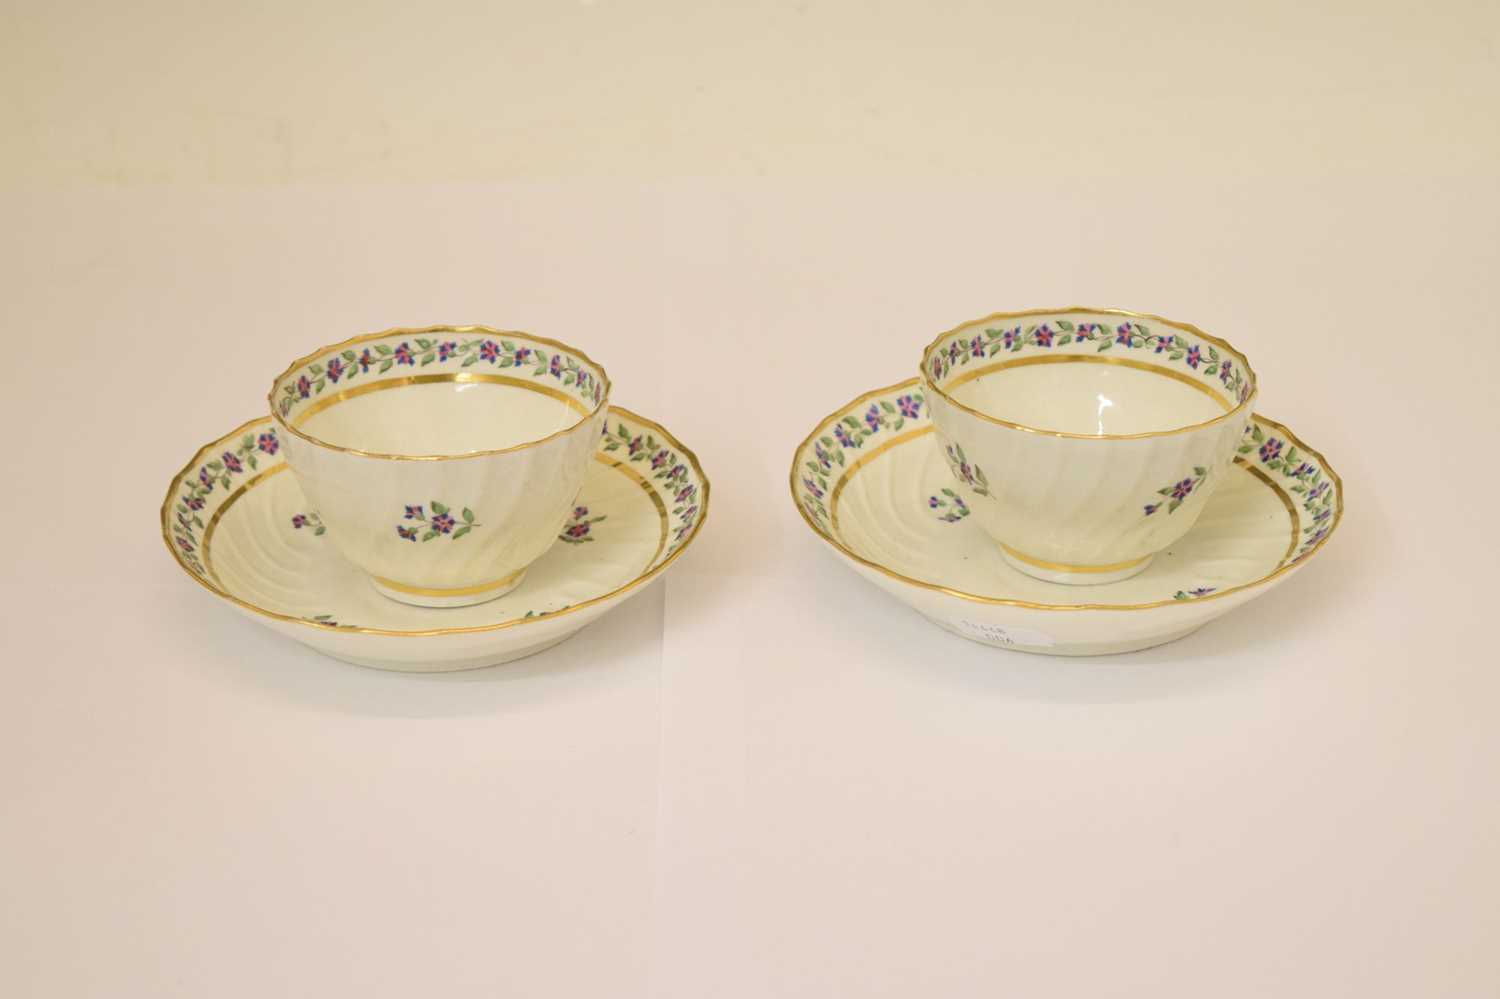 Pair of late 18th century New Hall-style spirally-fluted tea bowls and saucers - Image 3 of 10